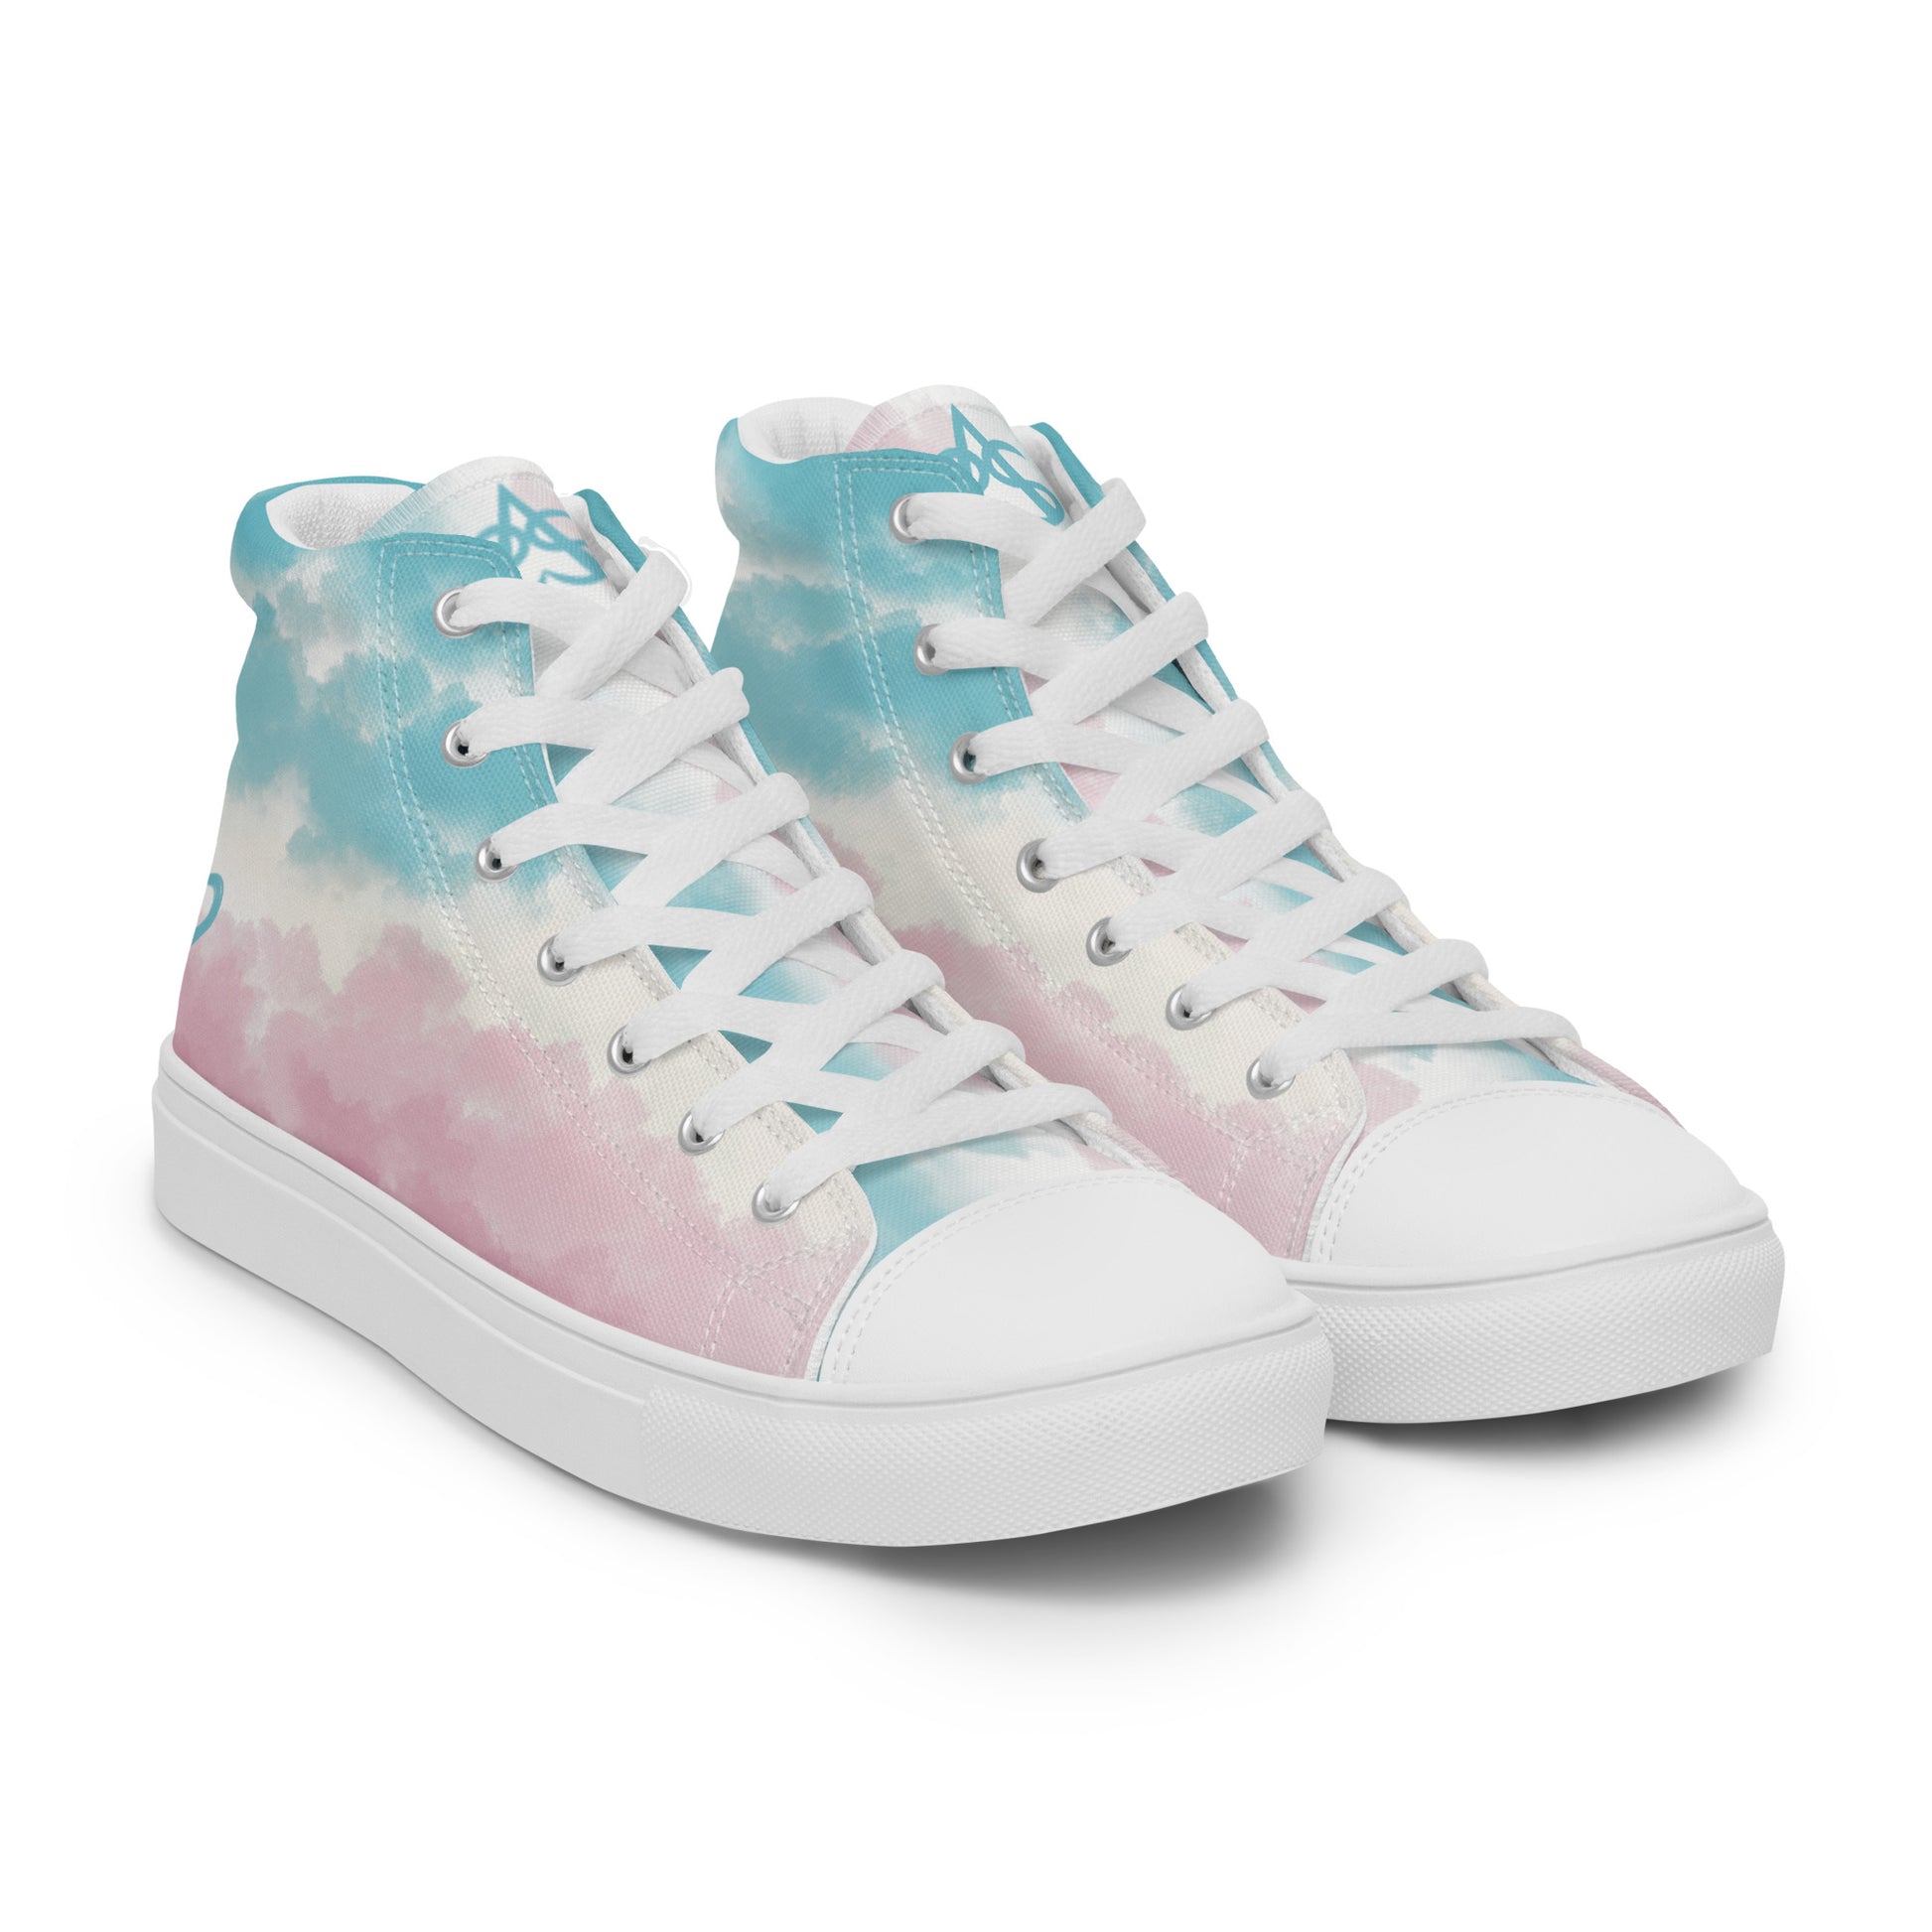 Right front view: High top shoes with a cloudy design in blue, white, and pink has a doodle style heart on the heel, white shoe laces, and white details.